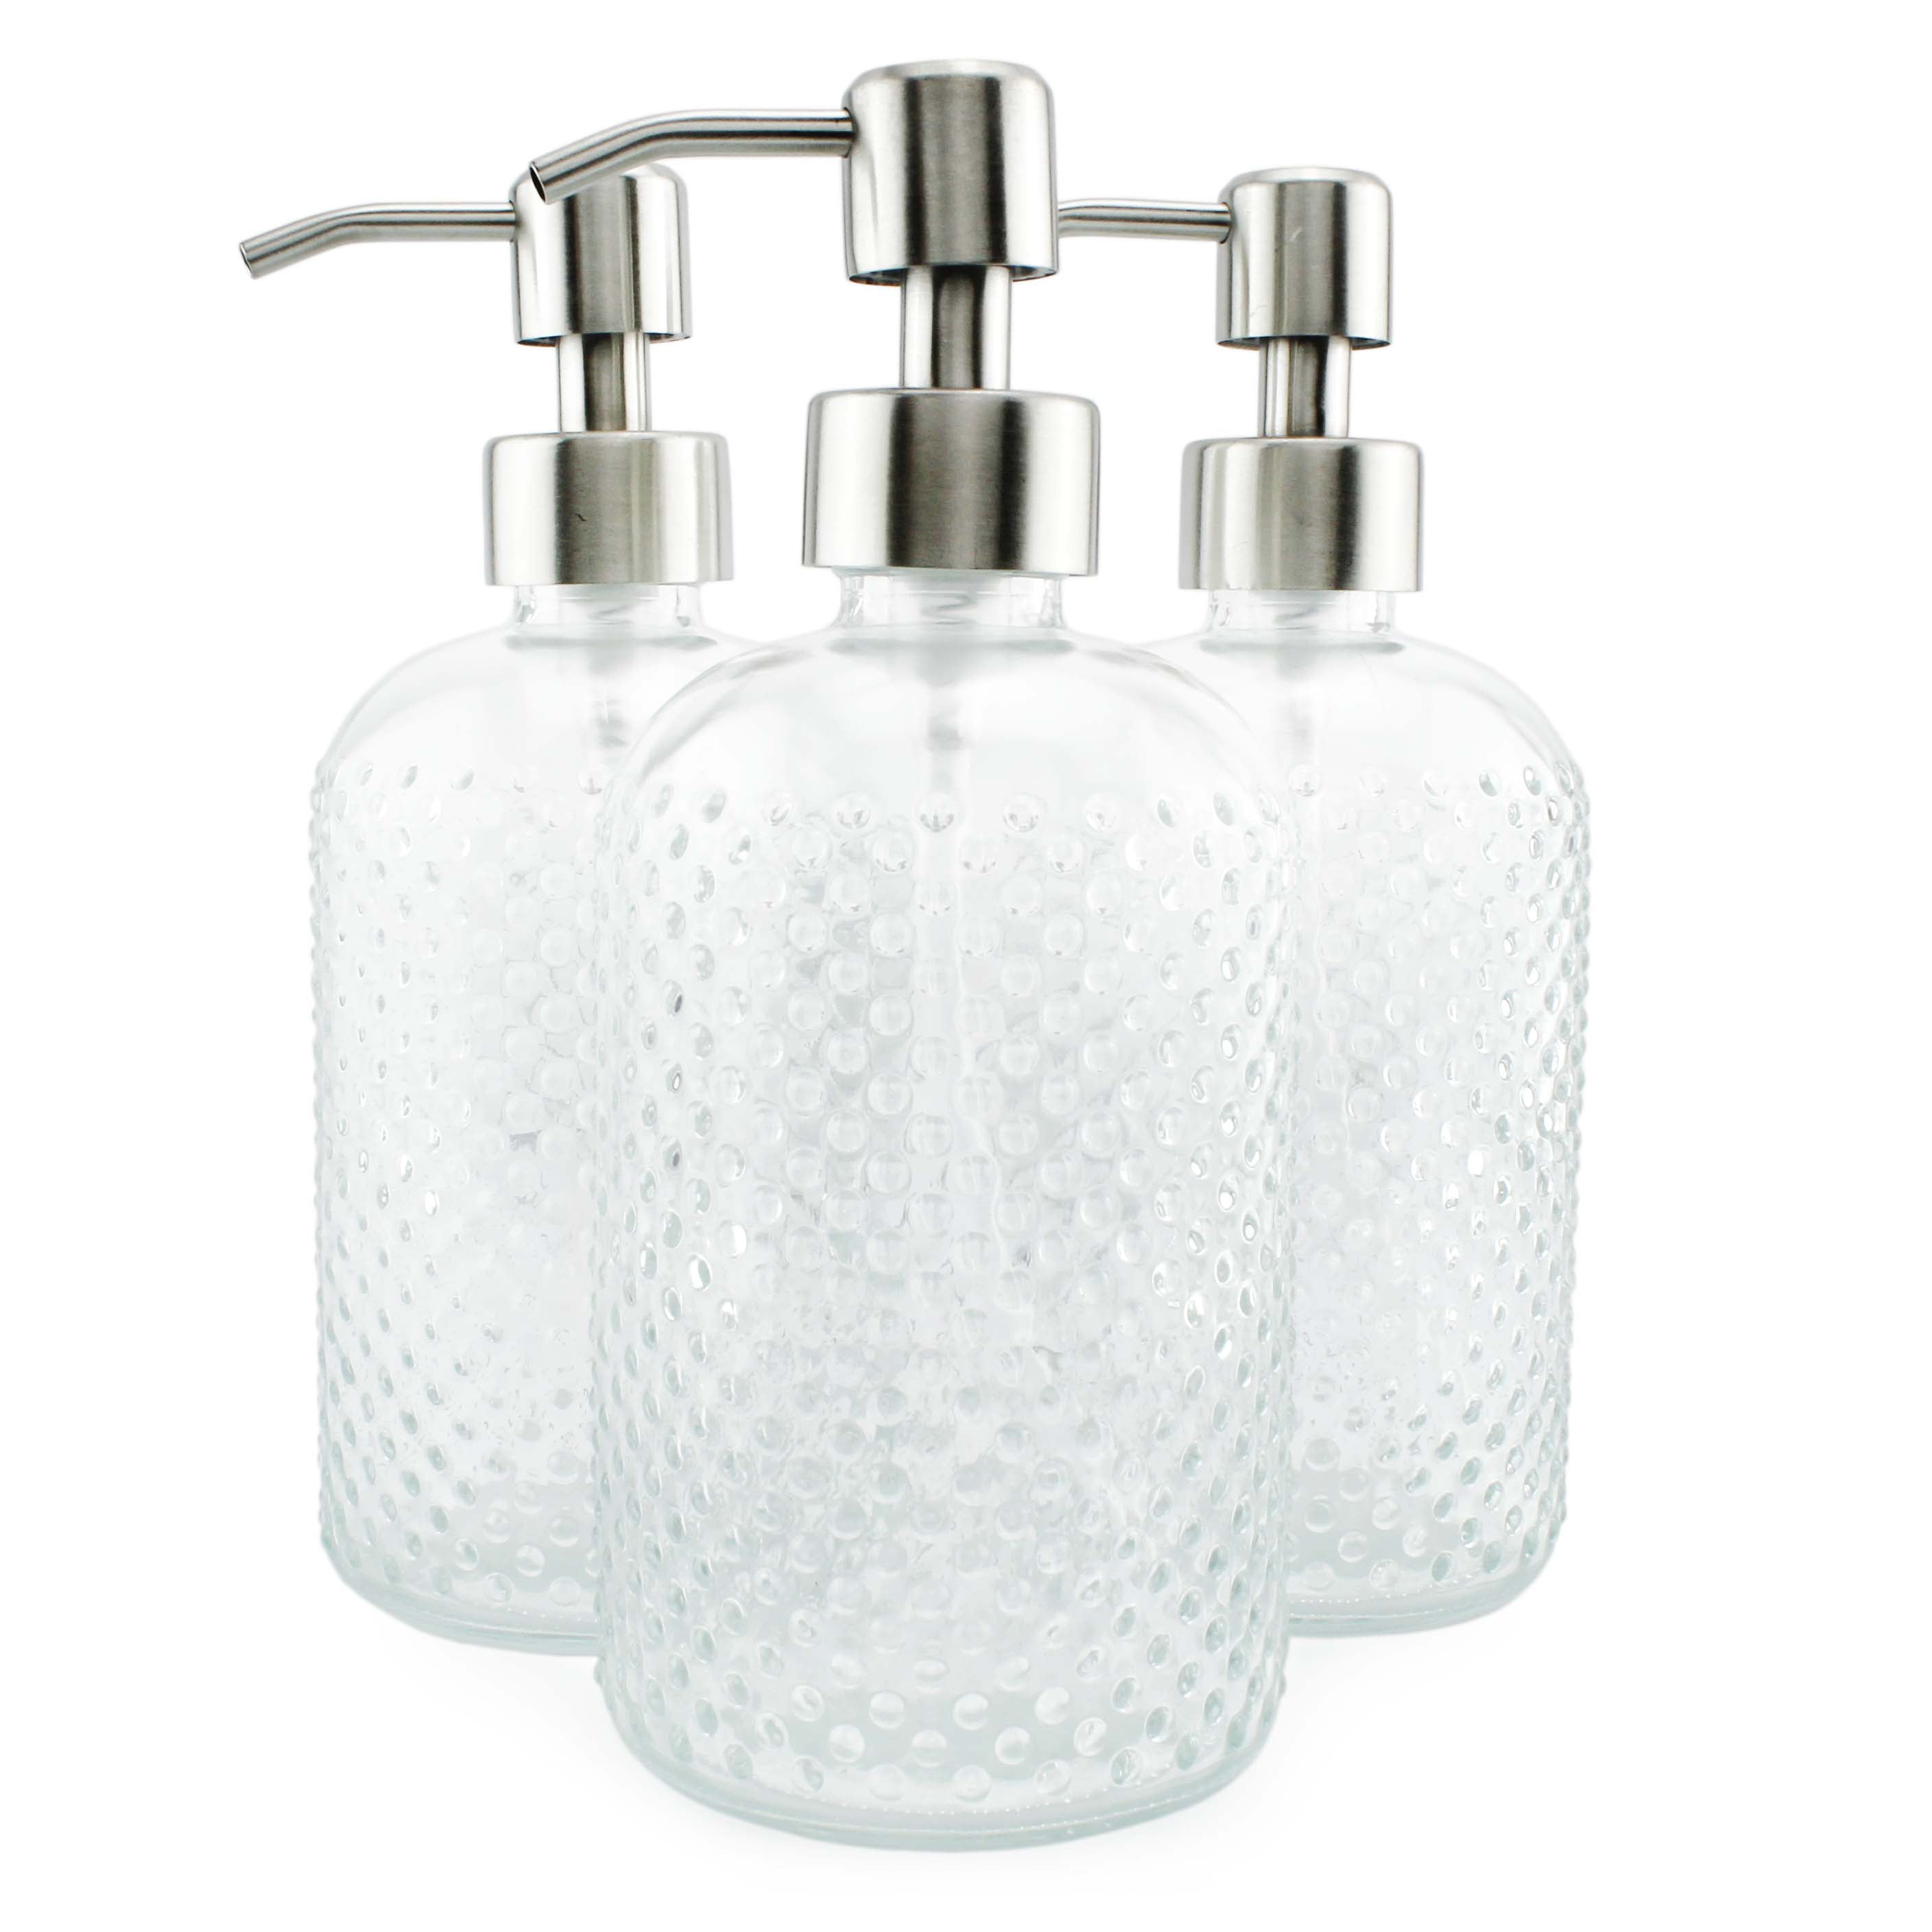 no drilling required Glass Soap Dispenser for tile, stone, glass